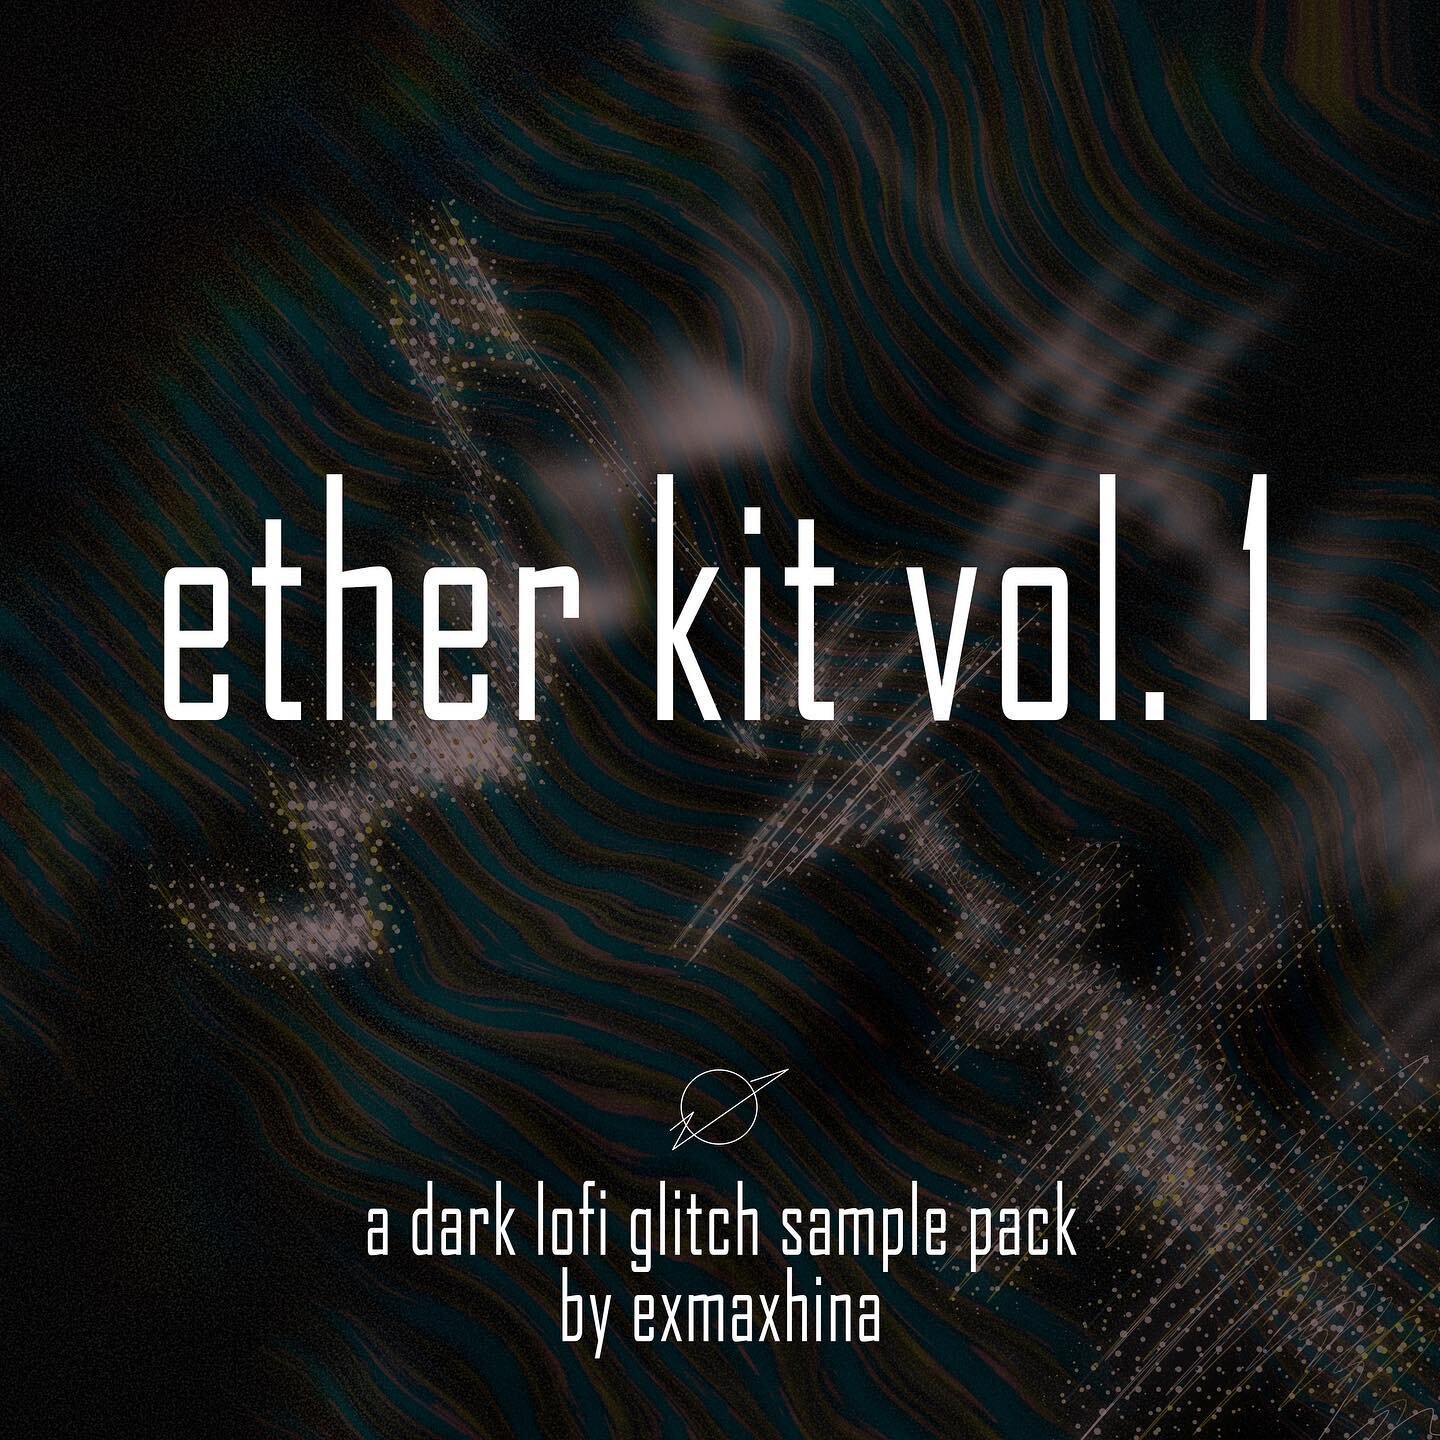 we are happy to announce our first dark lofi glitch sample pack is available for FREE on our discord channel if you join as a producer! Check the #producer-goodies tab for the freebies once you&rsquo;ve selected the producer role! This pack hosts ove